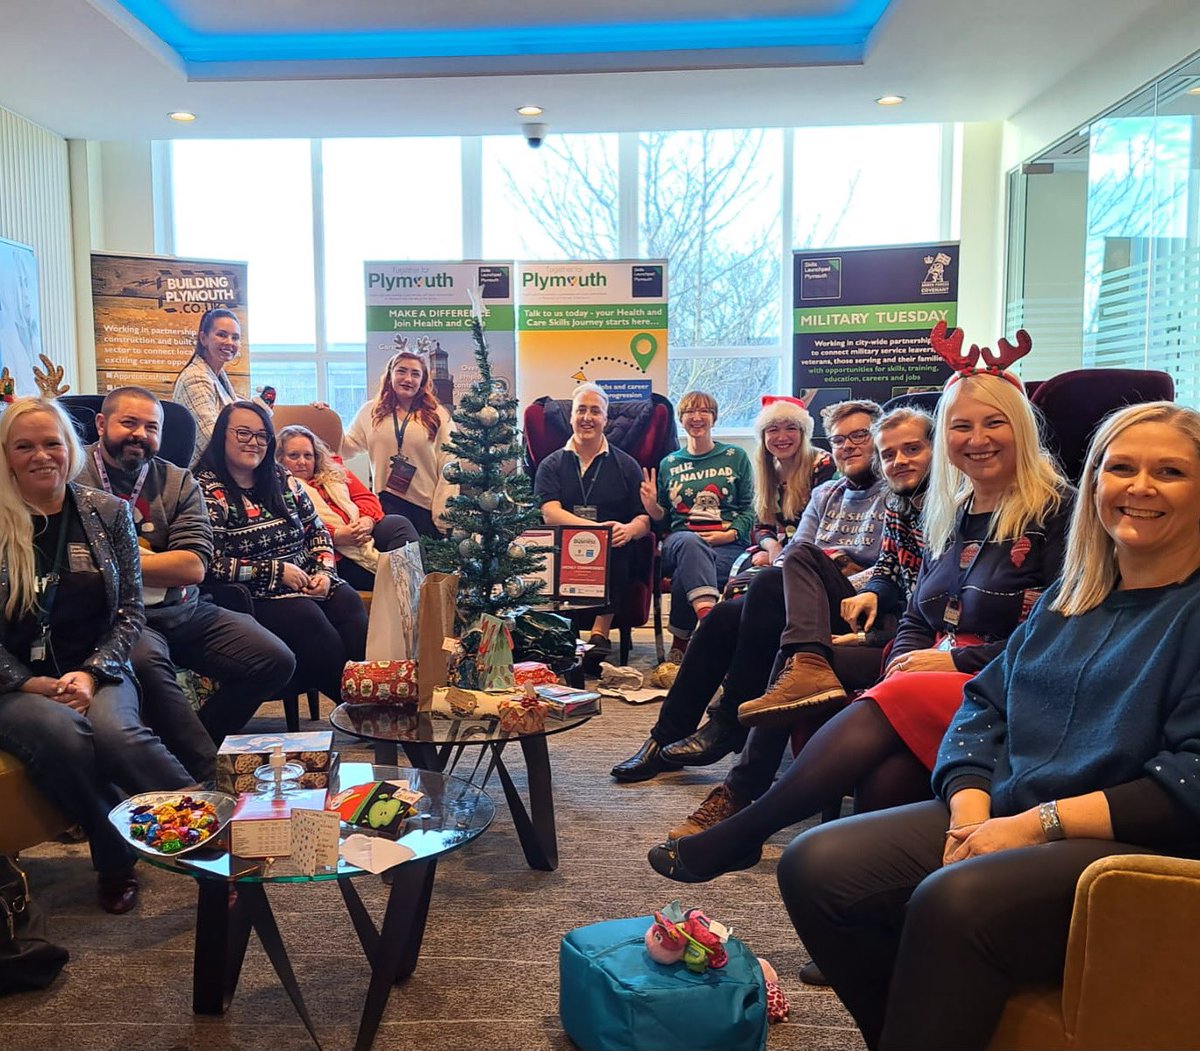 Great to see so many of #TeamLaunchpad together this afternoon for Secret Santa and marking our last day of face-to-face service from Skills Launchpad Plymouth before the festive break.

It’s beginning to look a lot like Christmas 🎅🏼🎄😁